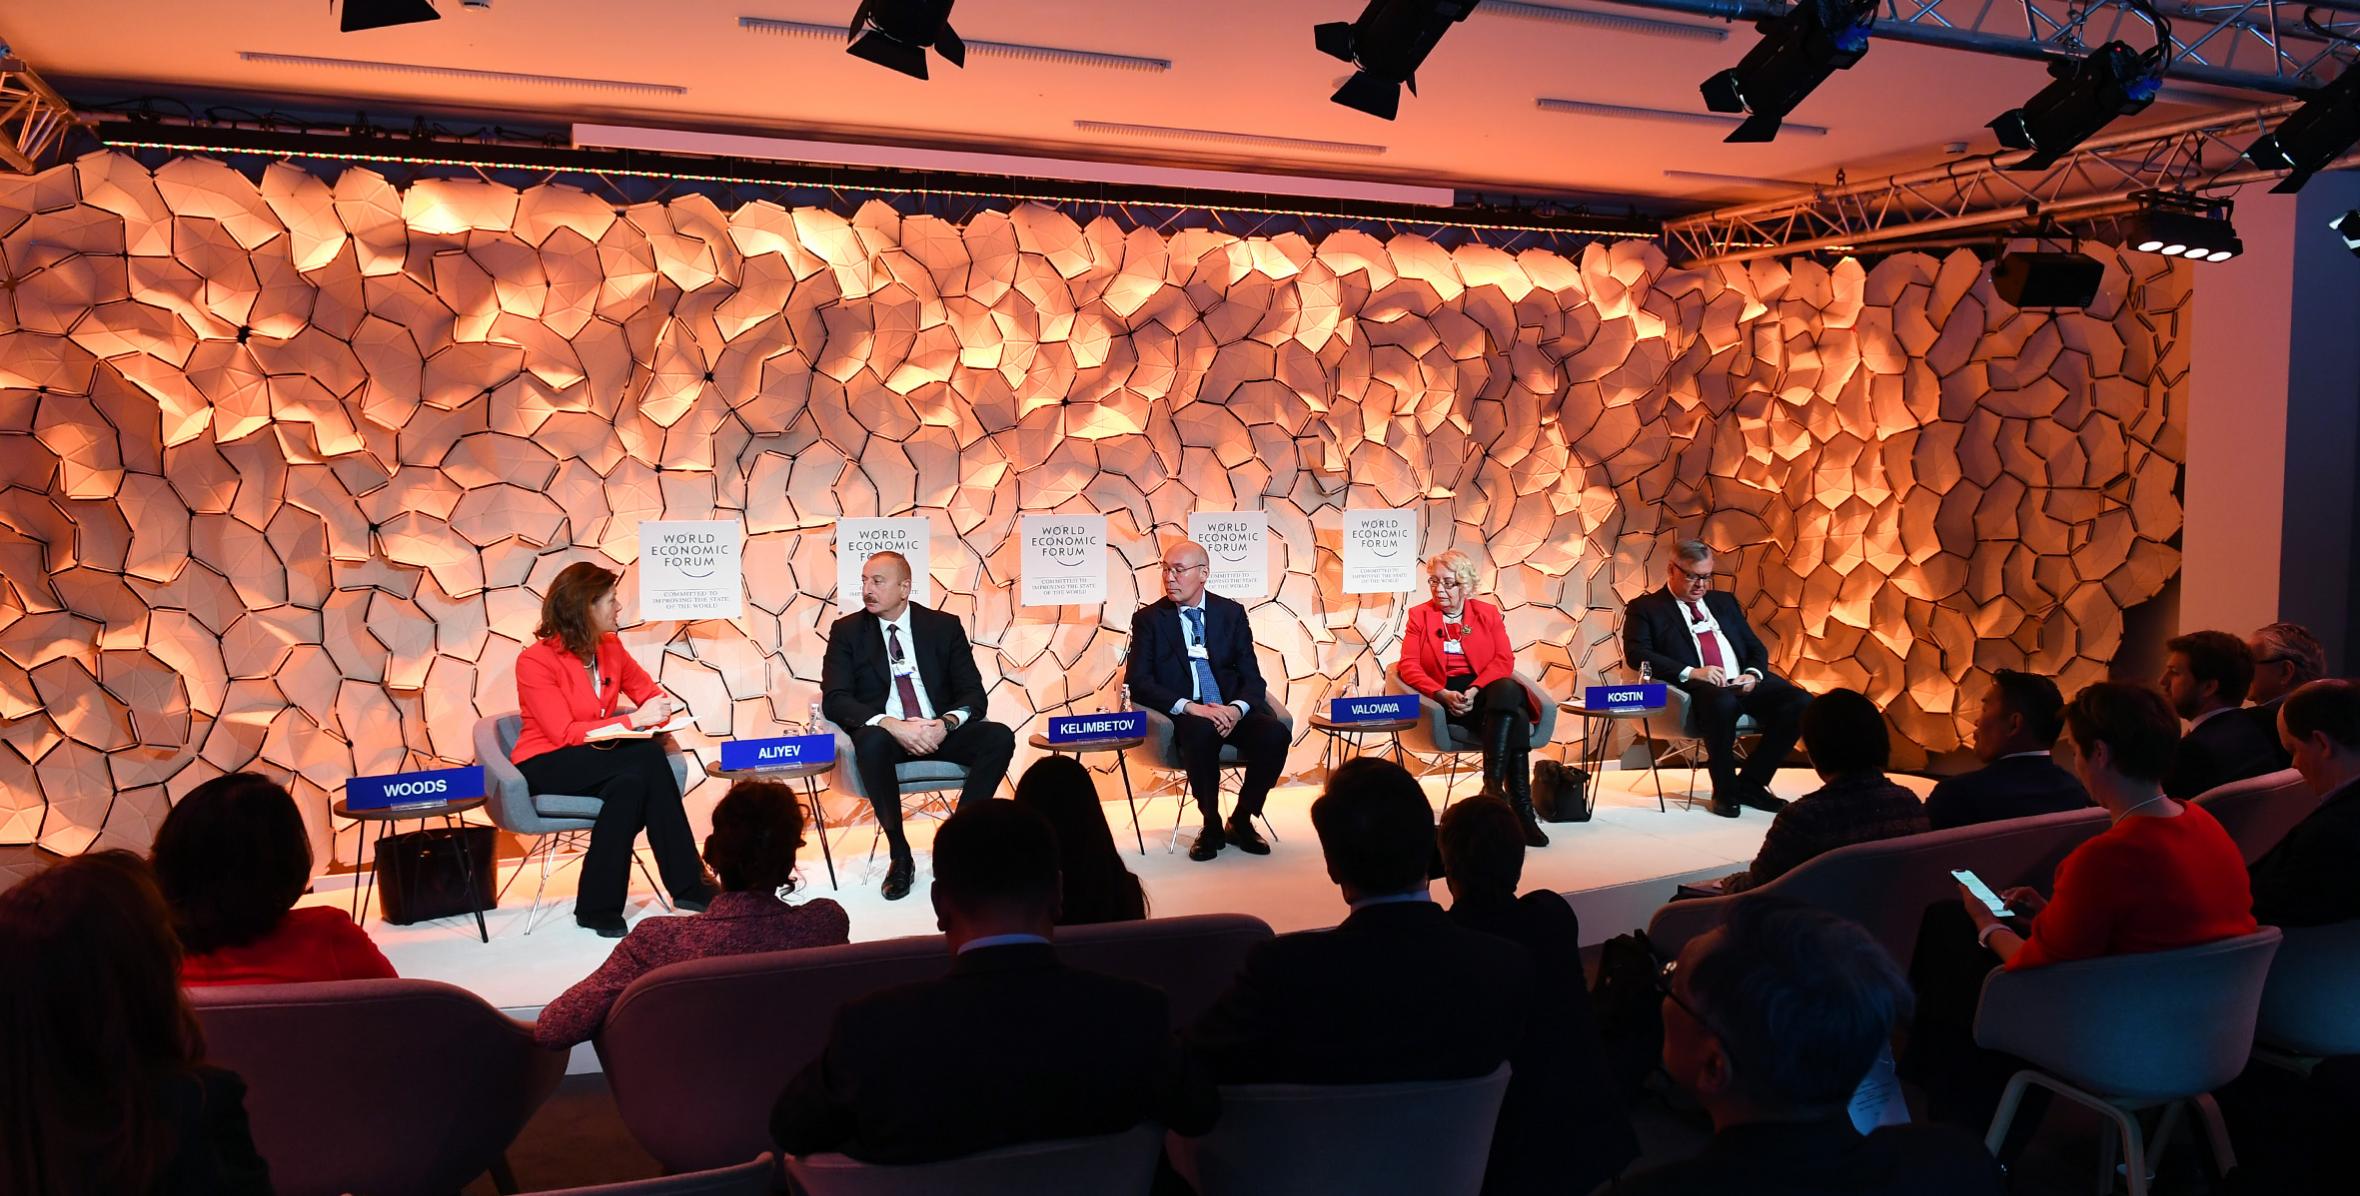 Ilham Aliyev attended panel discussion on “Strategic Outlook: Eurasia” as part of World Economic Forum